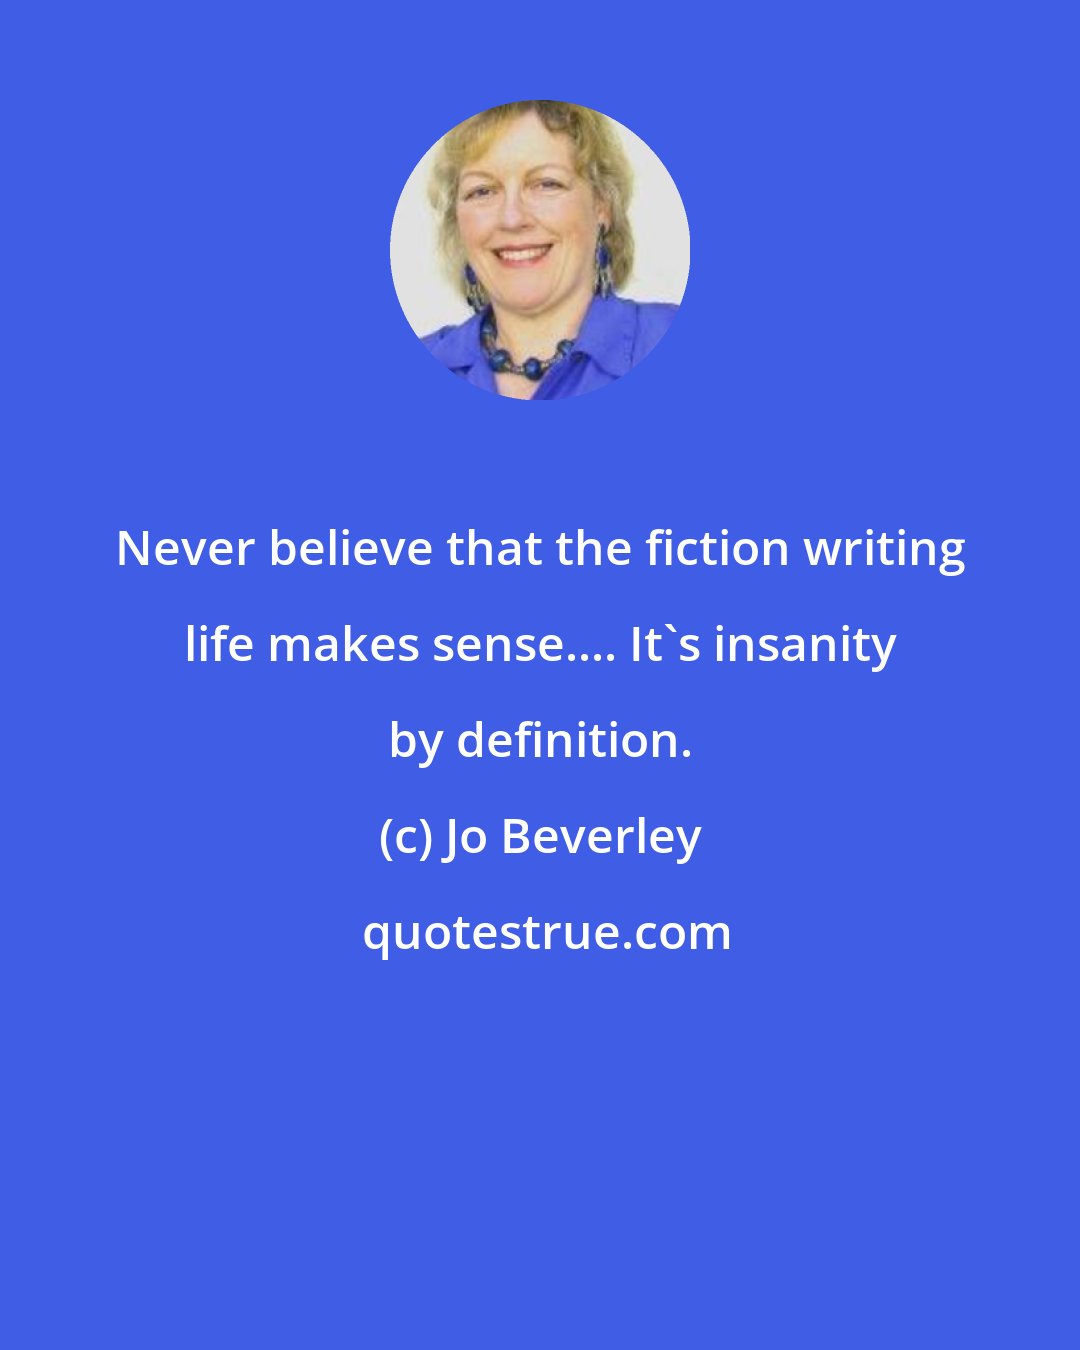 Jo Beverley: Never believe that the fiction writing life makes sense.... It's insanity by definition.